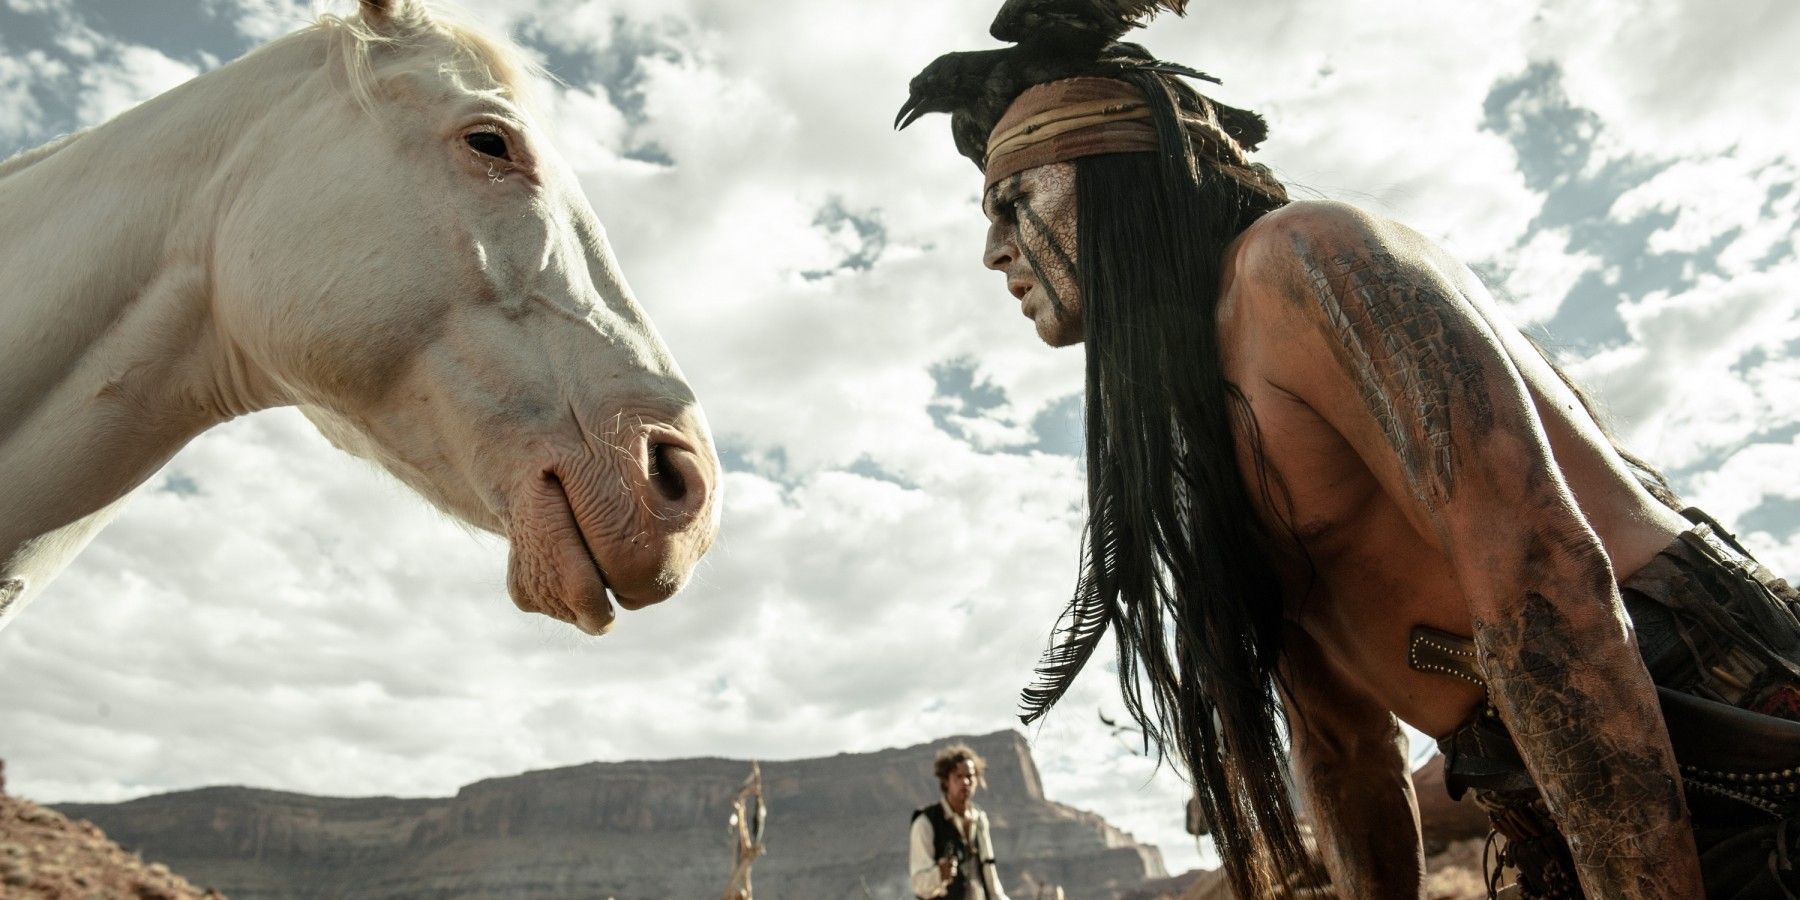 Tonto-and-Horse-Looking-in-Lone-Ranger.